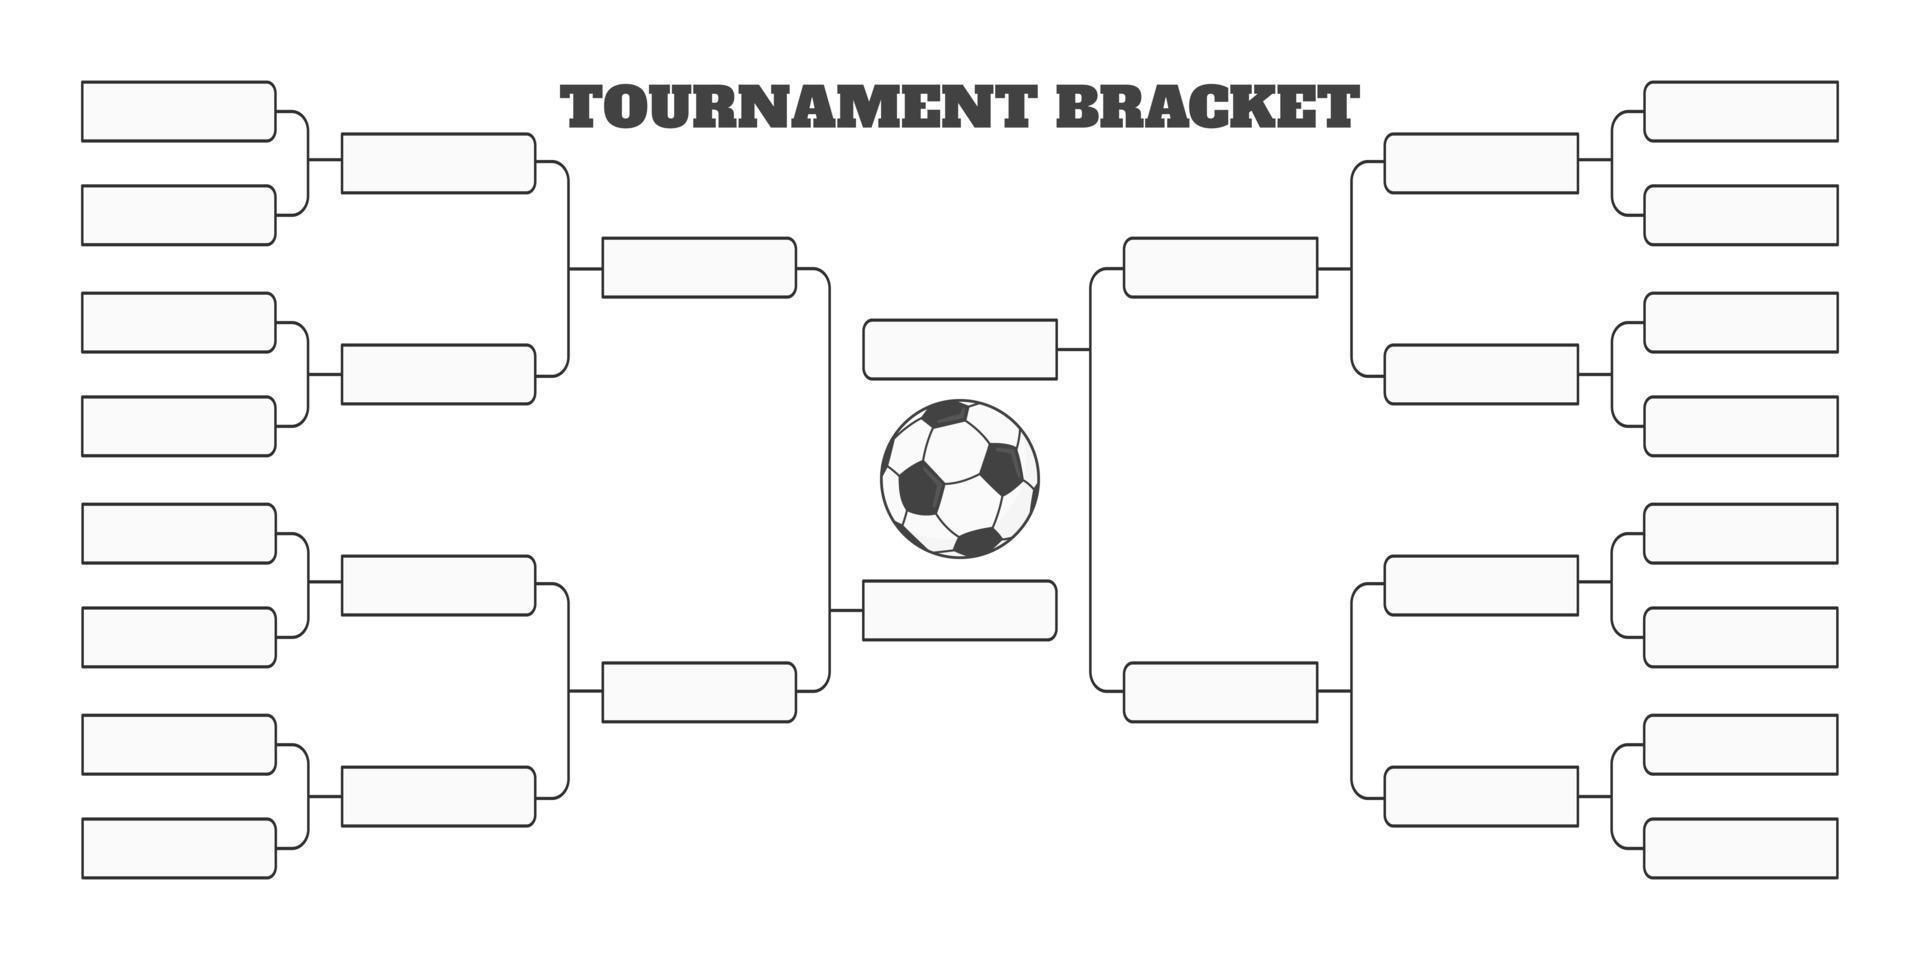 16 soccer team tournament bracket championship template flat style design vector illustration isolated on white background.